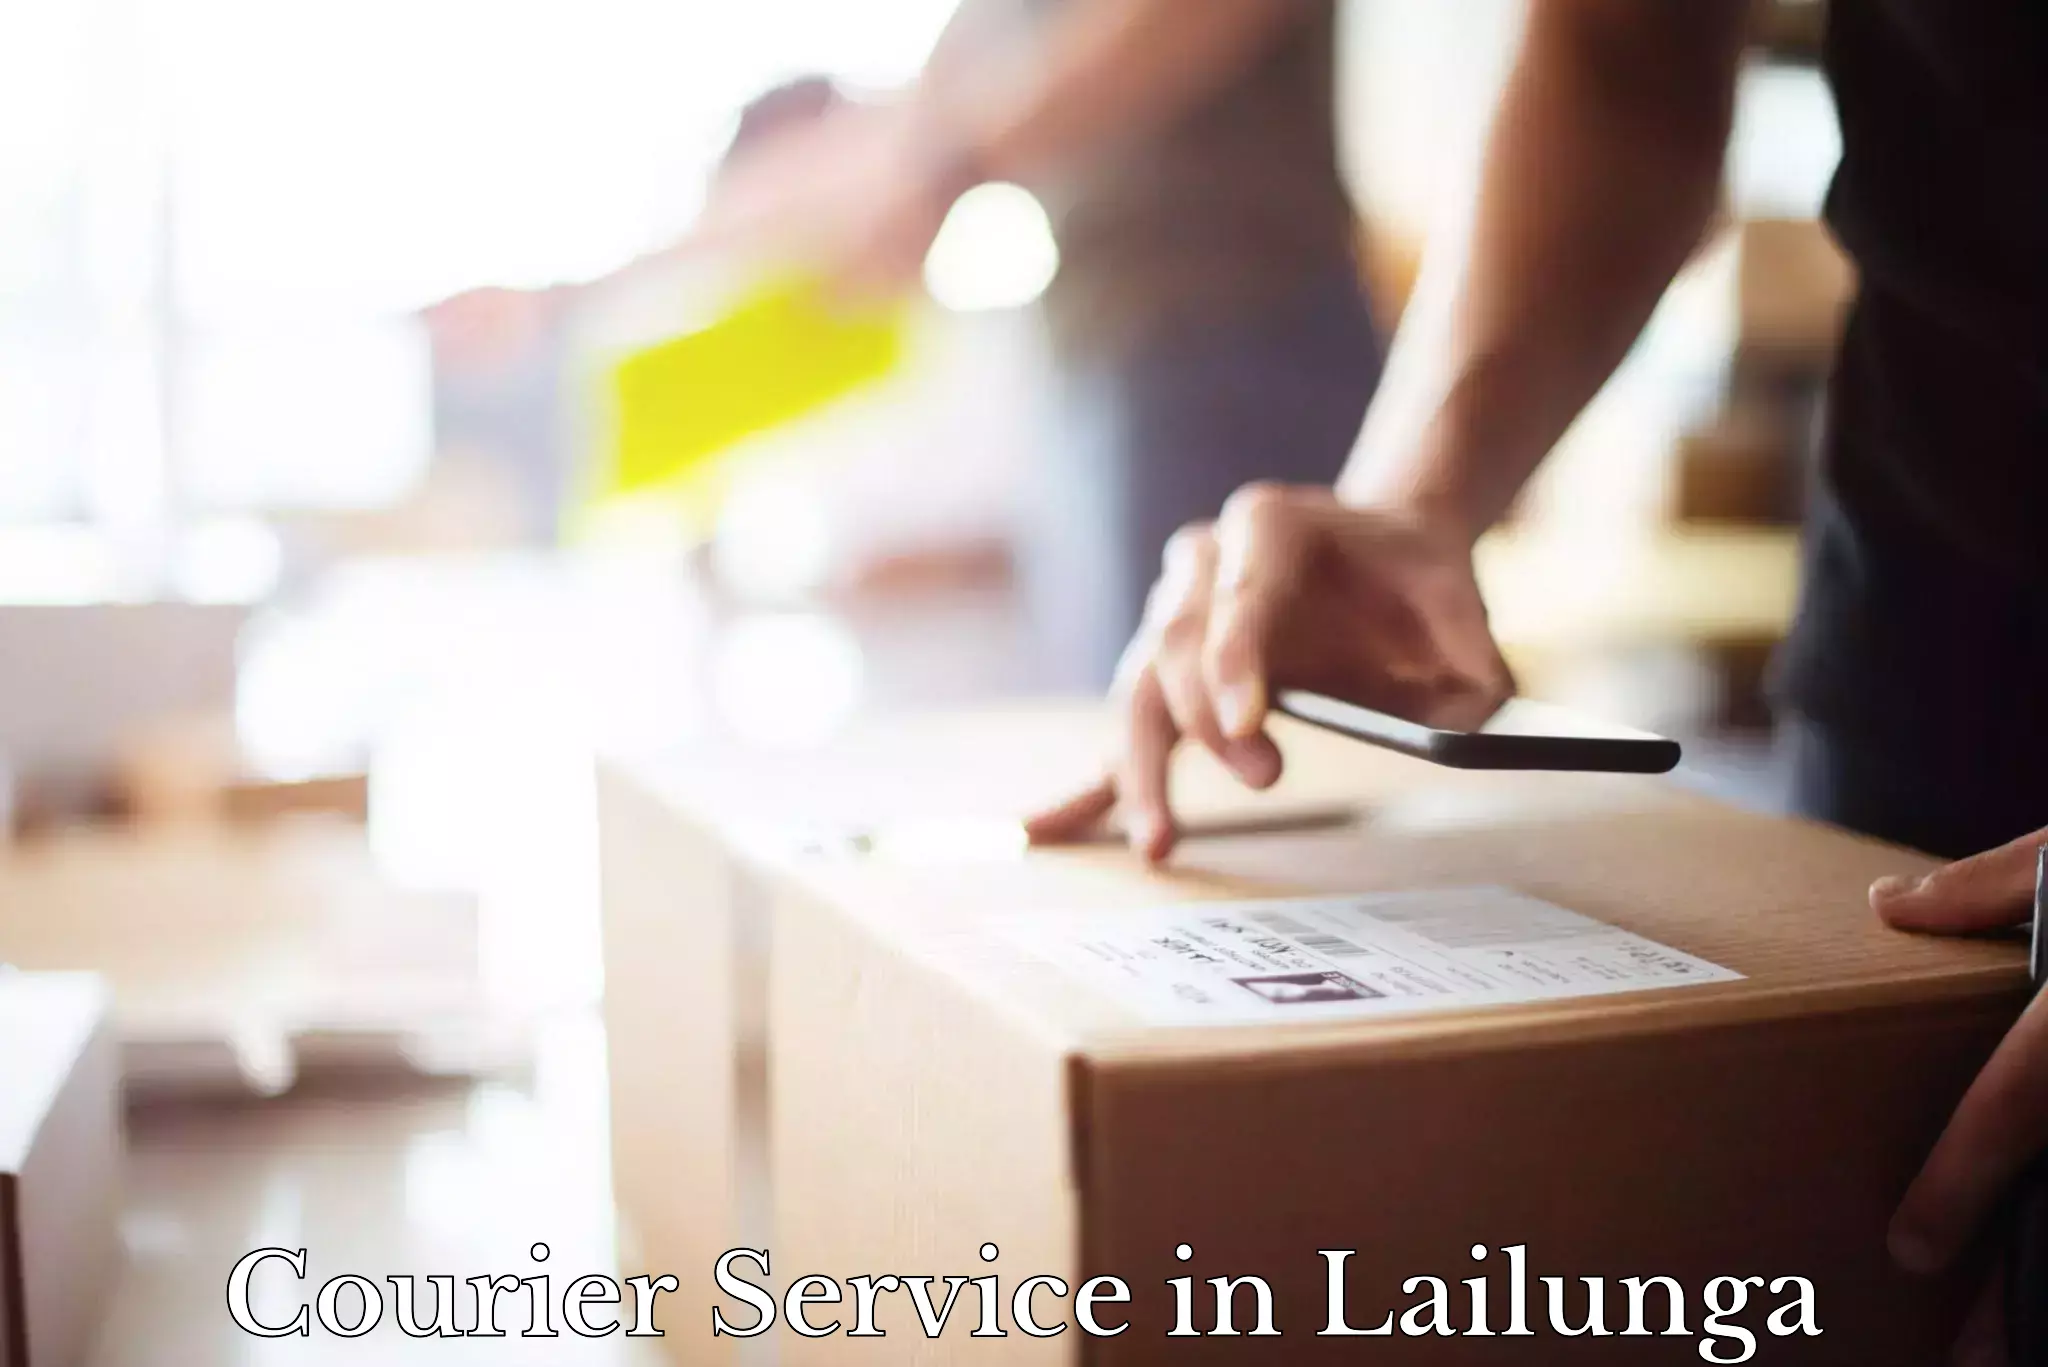 24-hour courier services in Lailunga